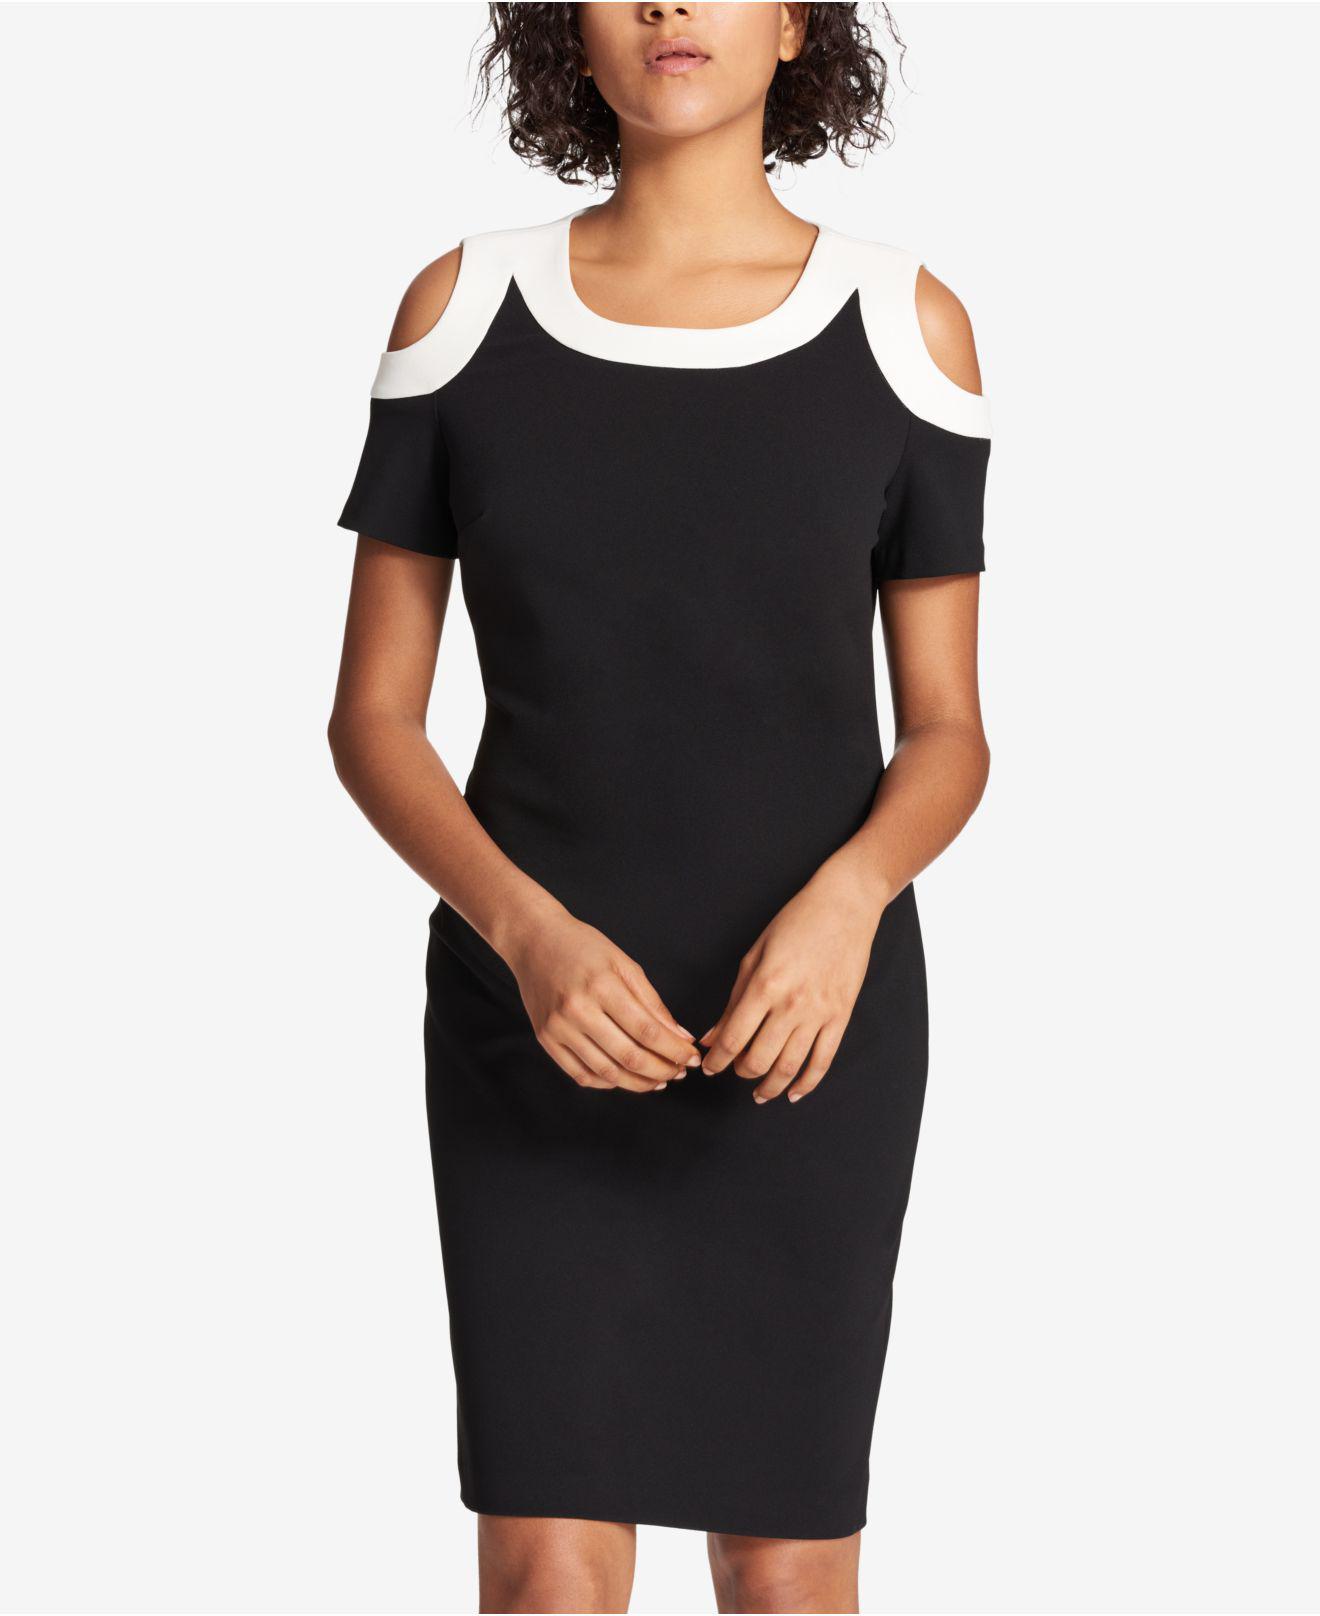 tommy hilfiger black and white dress 